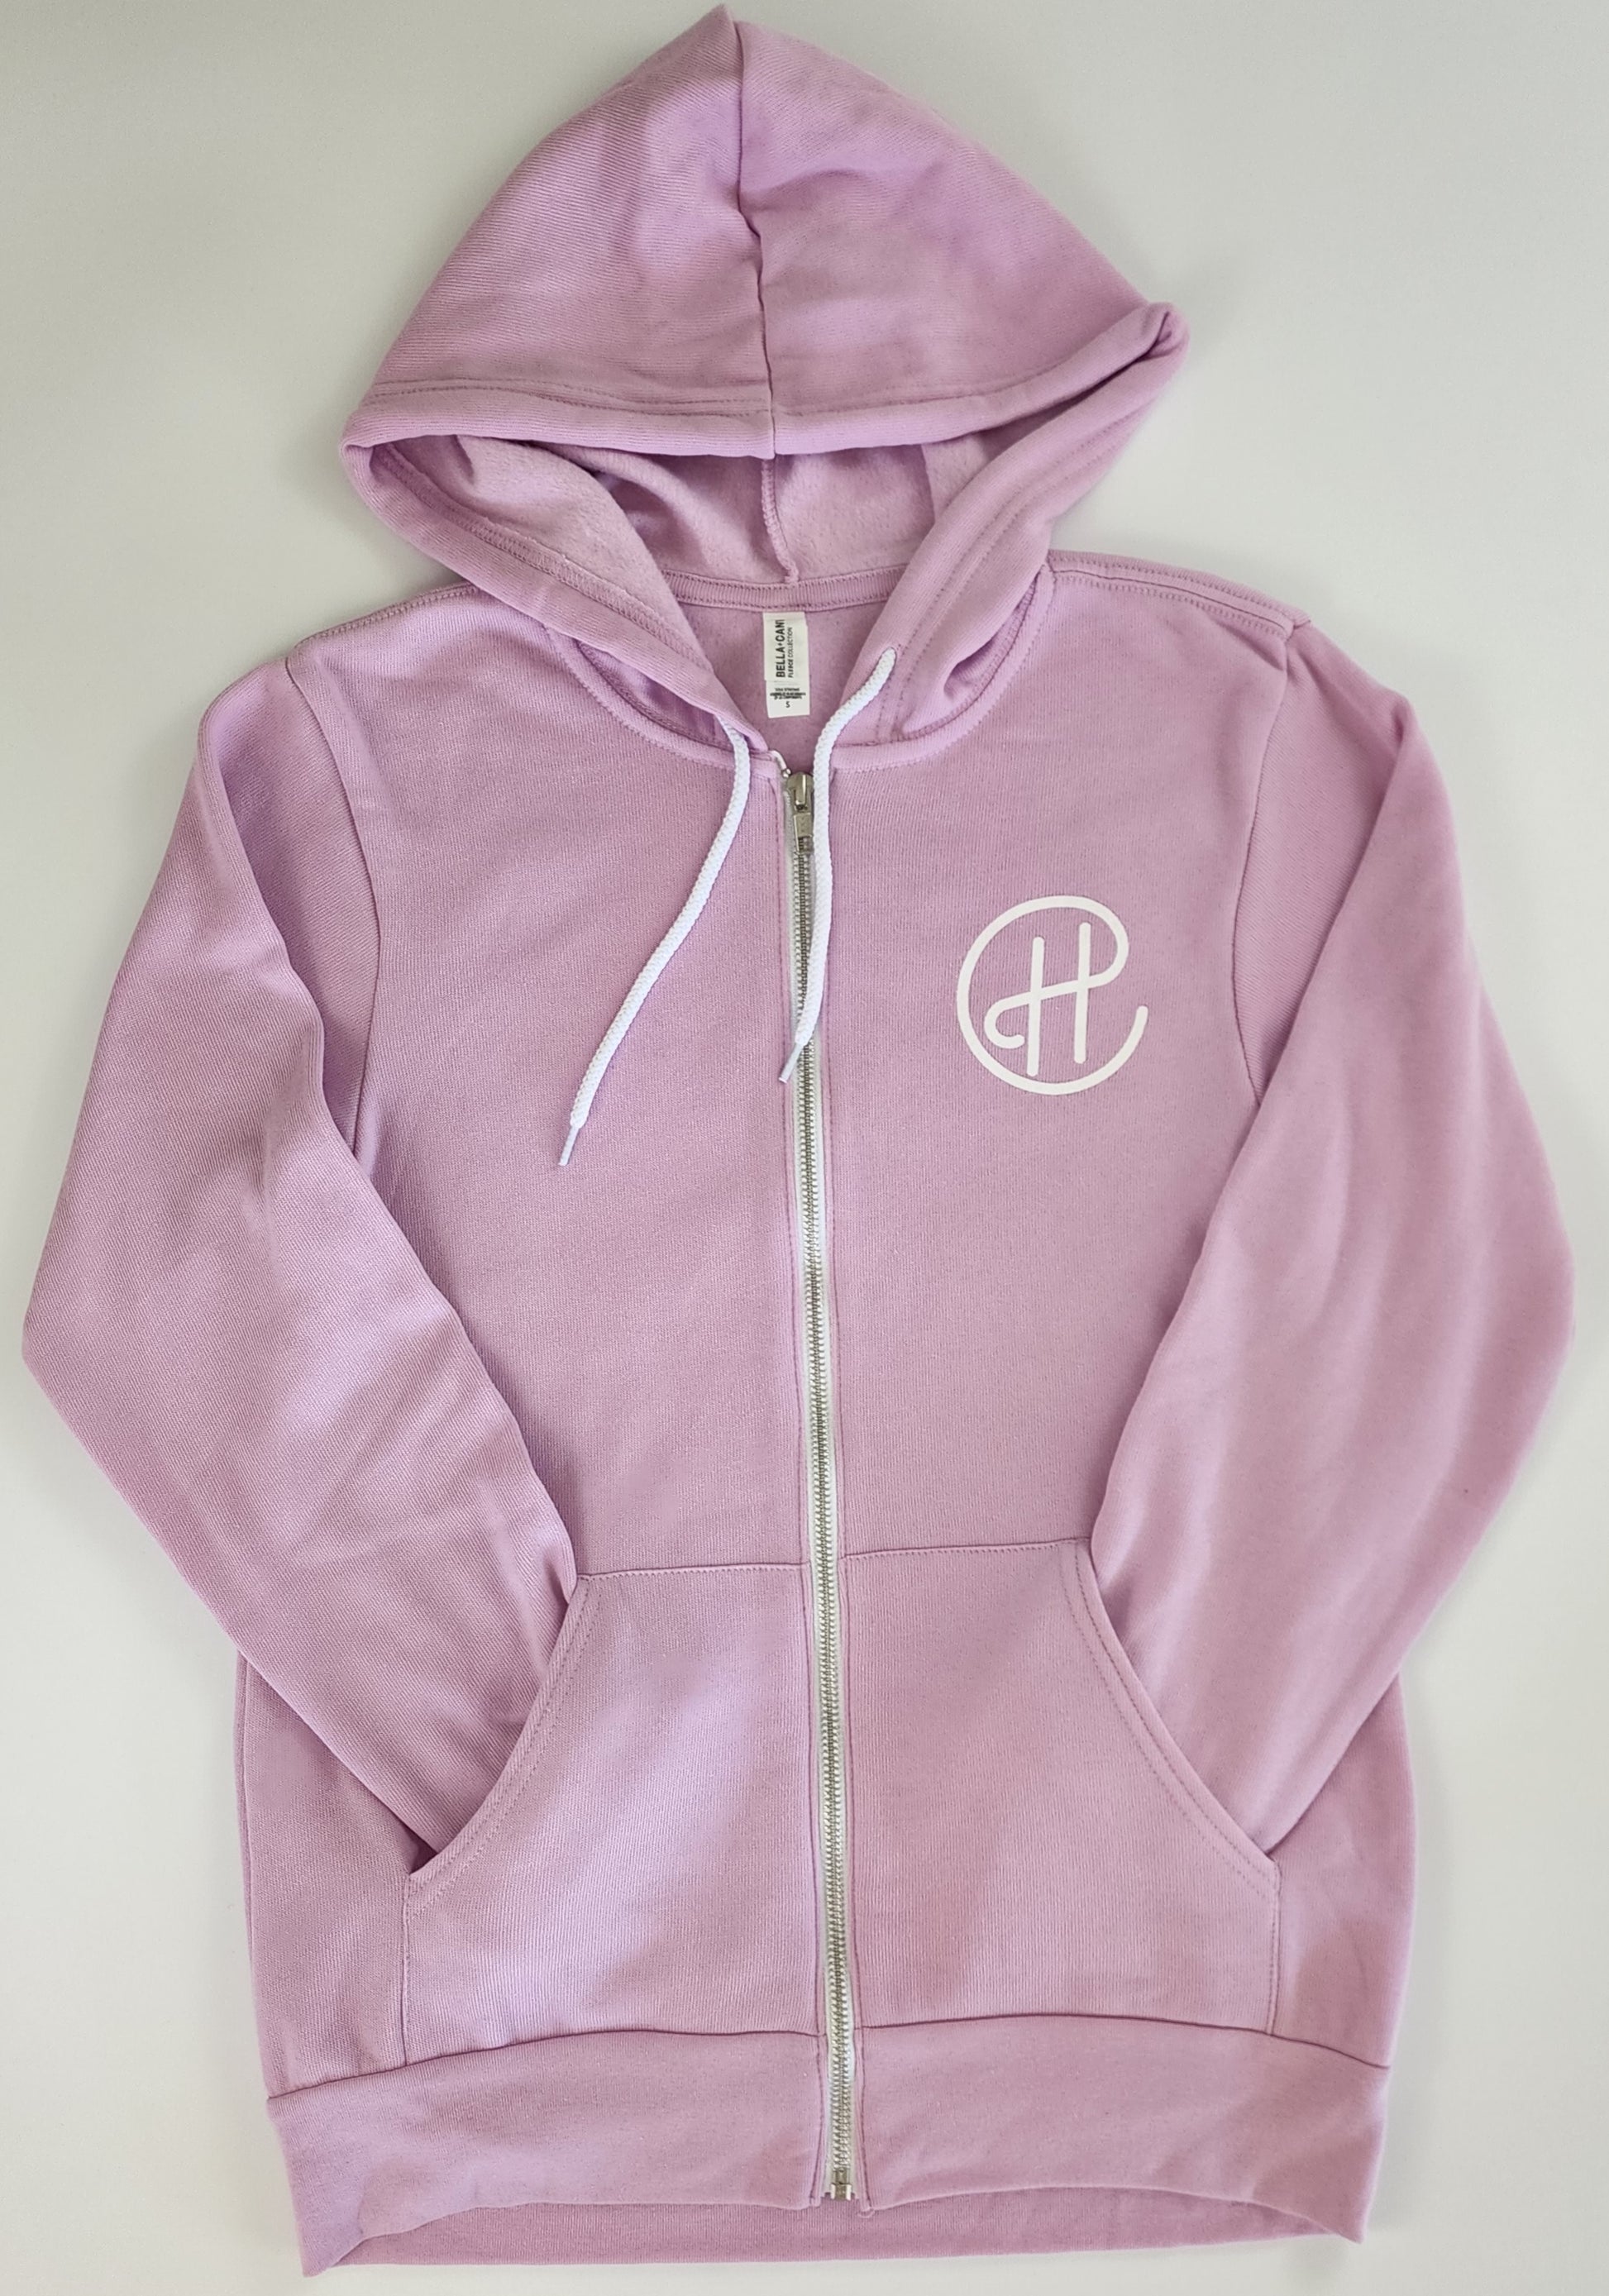 The front of a unisex light-purple zip-up hoodie. Over the left breast in white screen printing are the letters "CH" written in a swirly way, where the bar portion of the H extends up to connect with the C, which encircles the H.